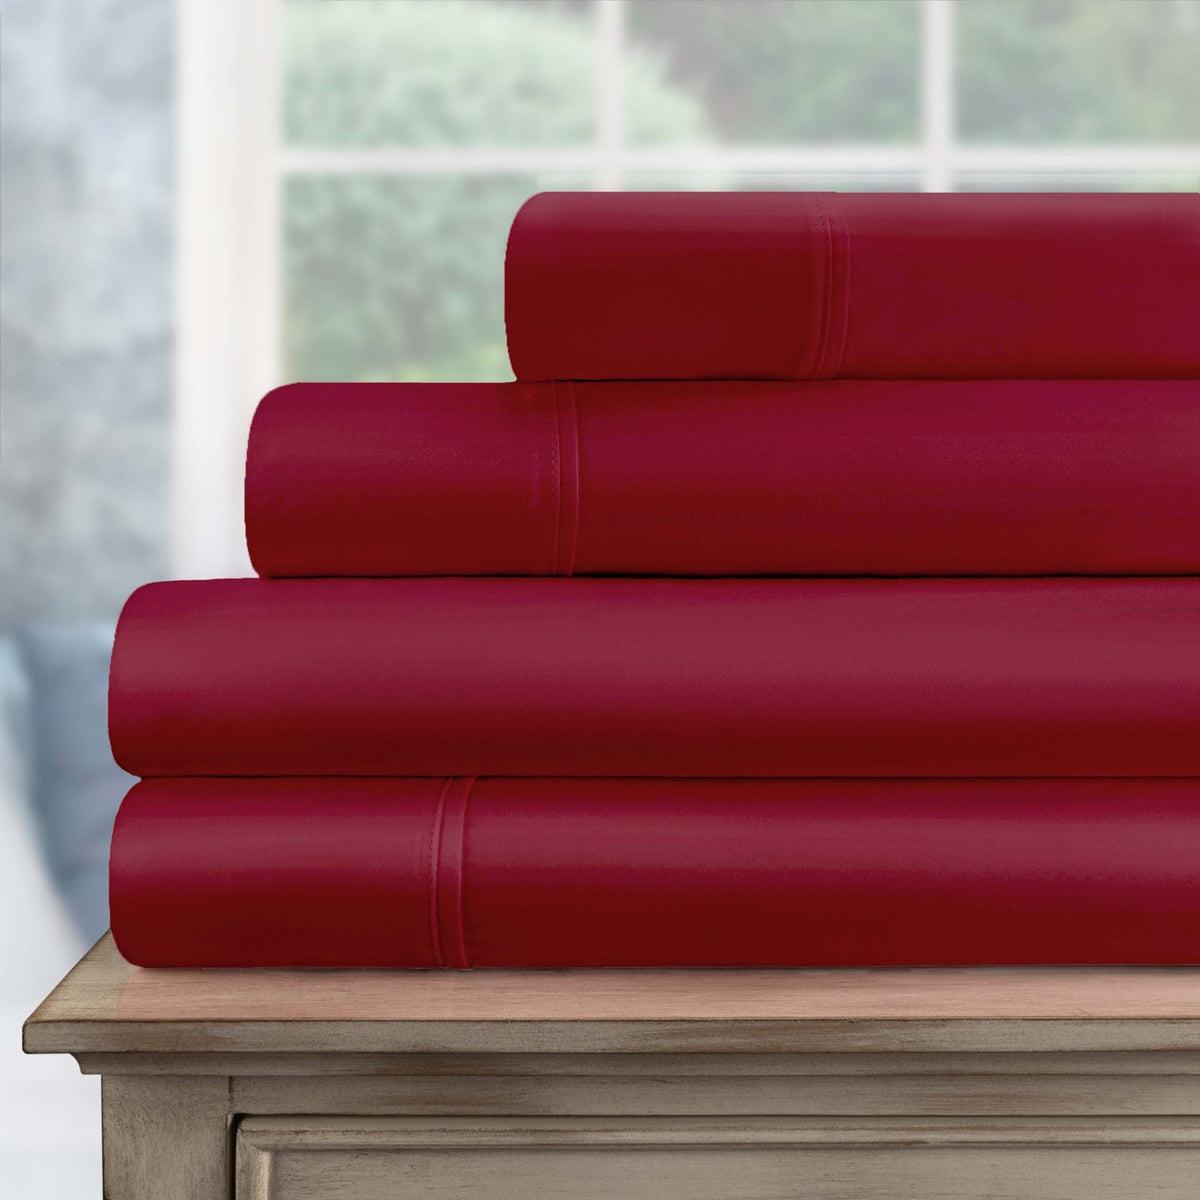 Egyptian Cotton 700 Thread Count Eco Friendly Solid Sheet Set - Burgundy